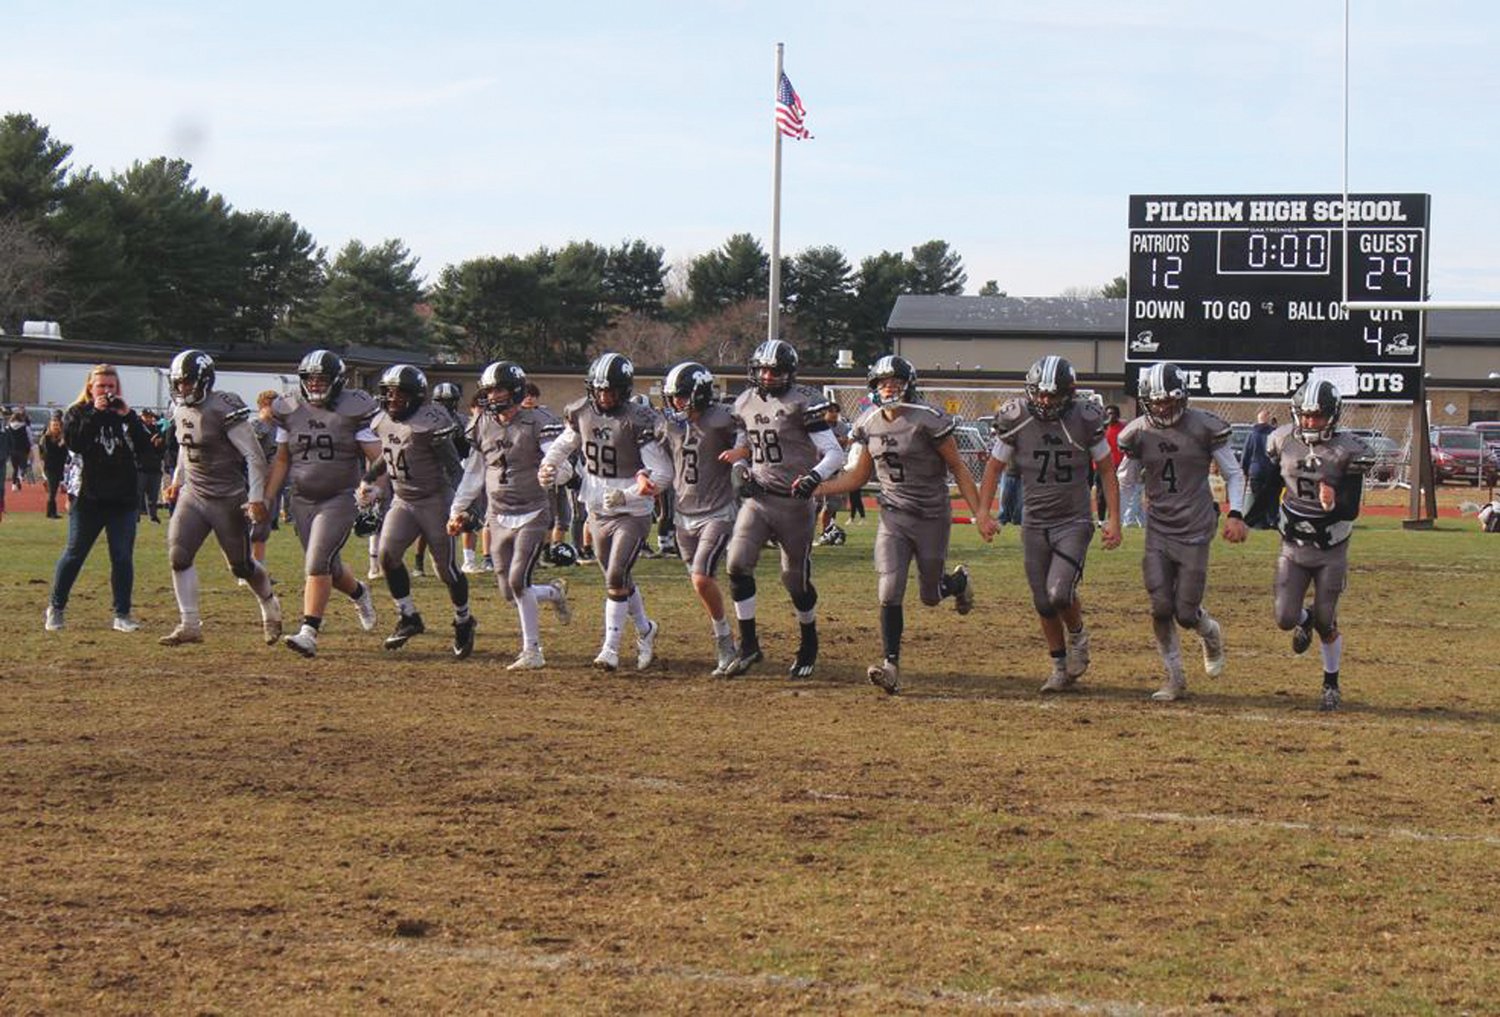 THE FINAL LAP: The Pilgrim football seniors take one last lap together after the conclusion of the 2021 Warwick Beacon Bowl last Thursday afternoon.